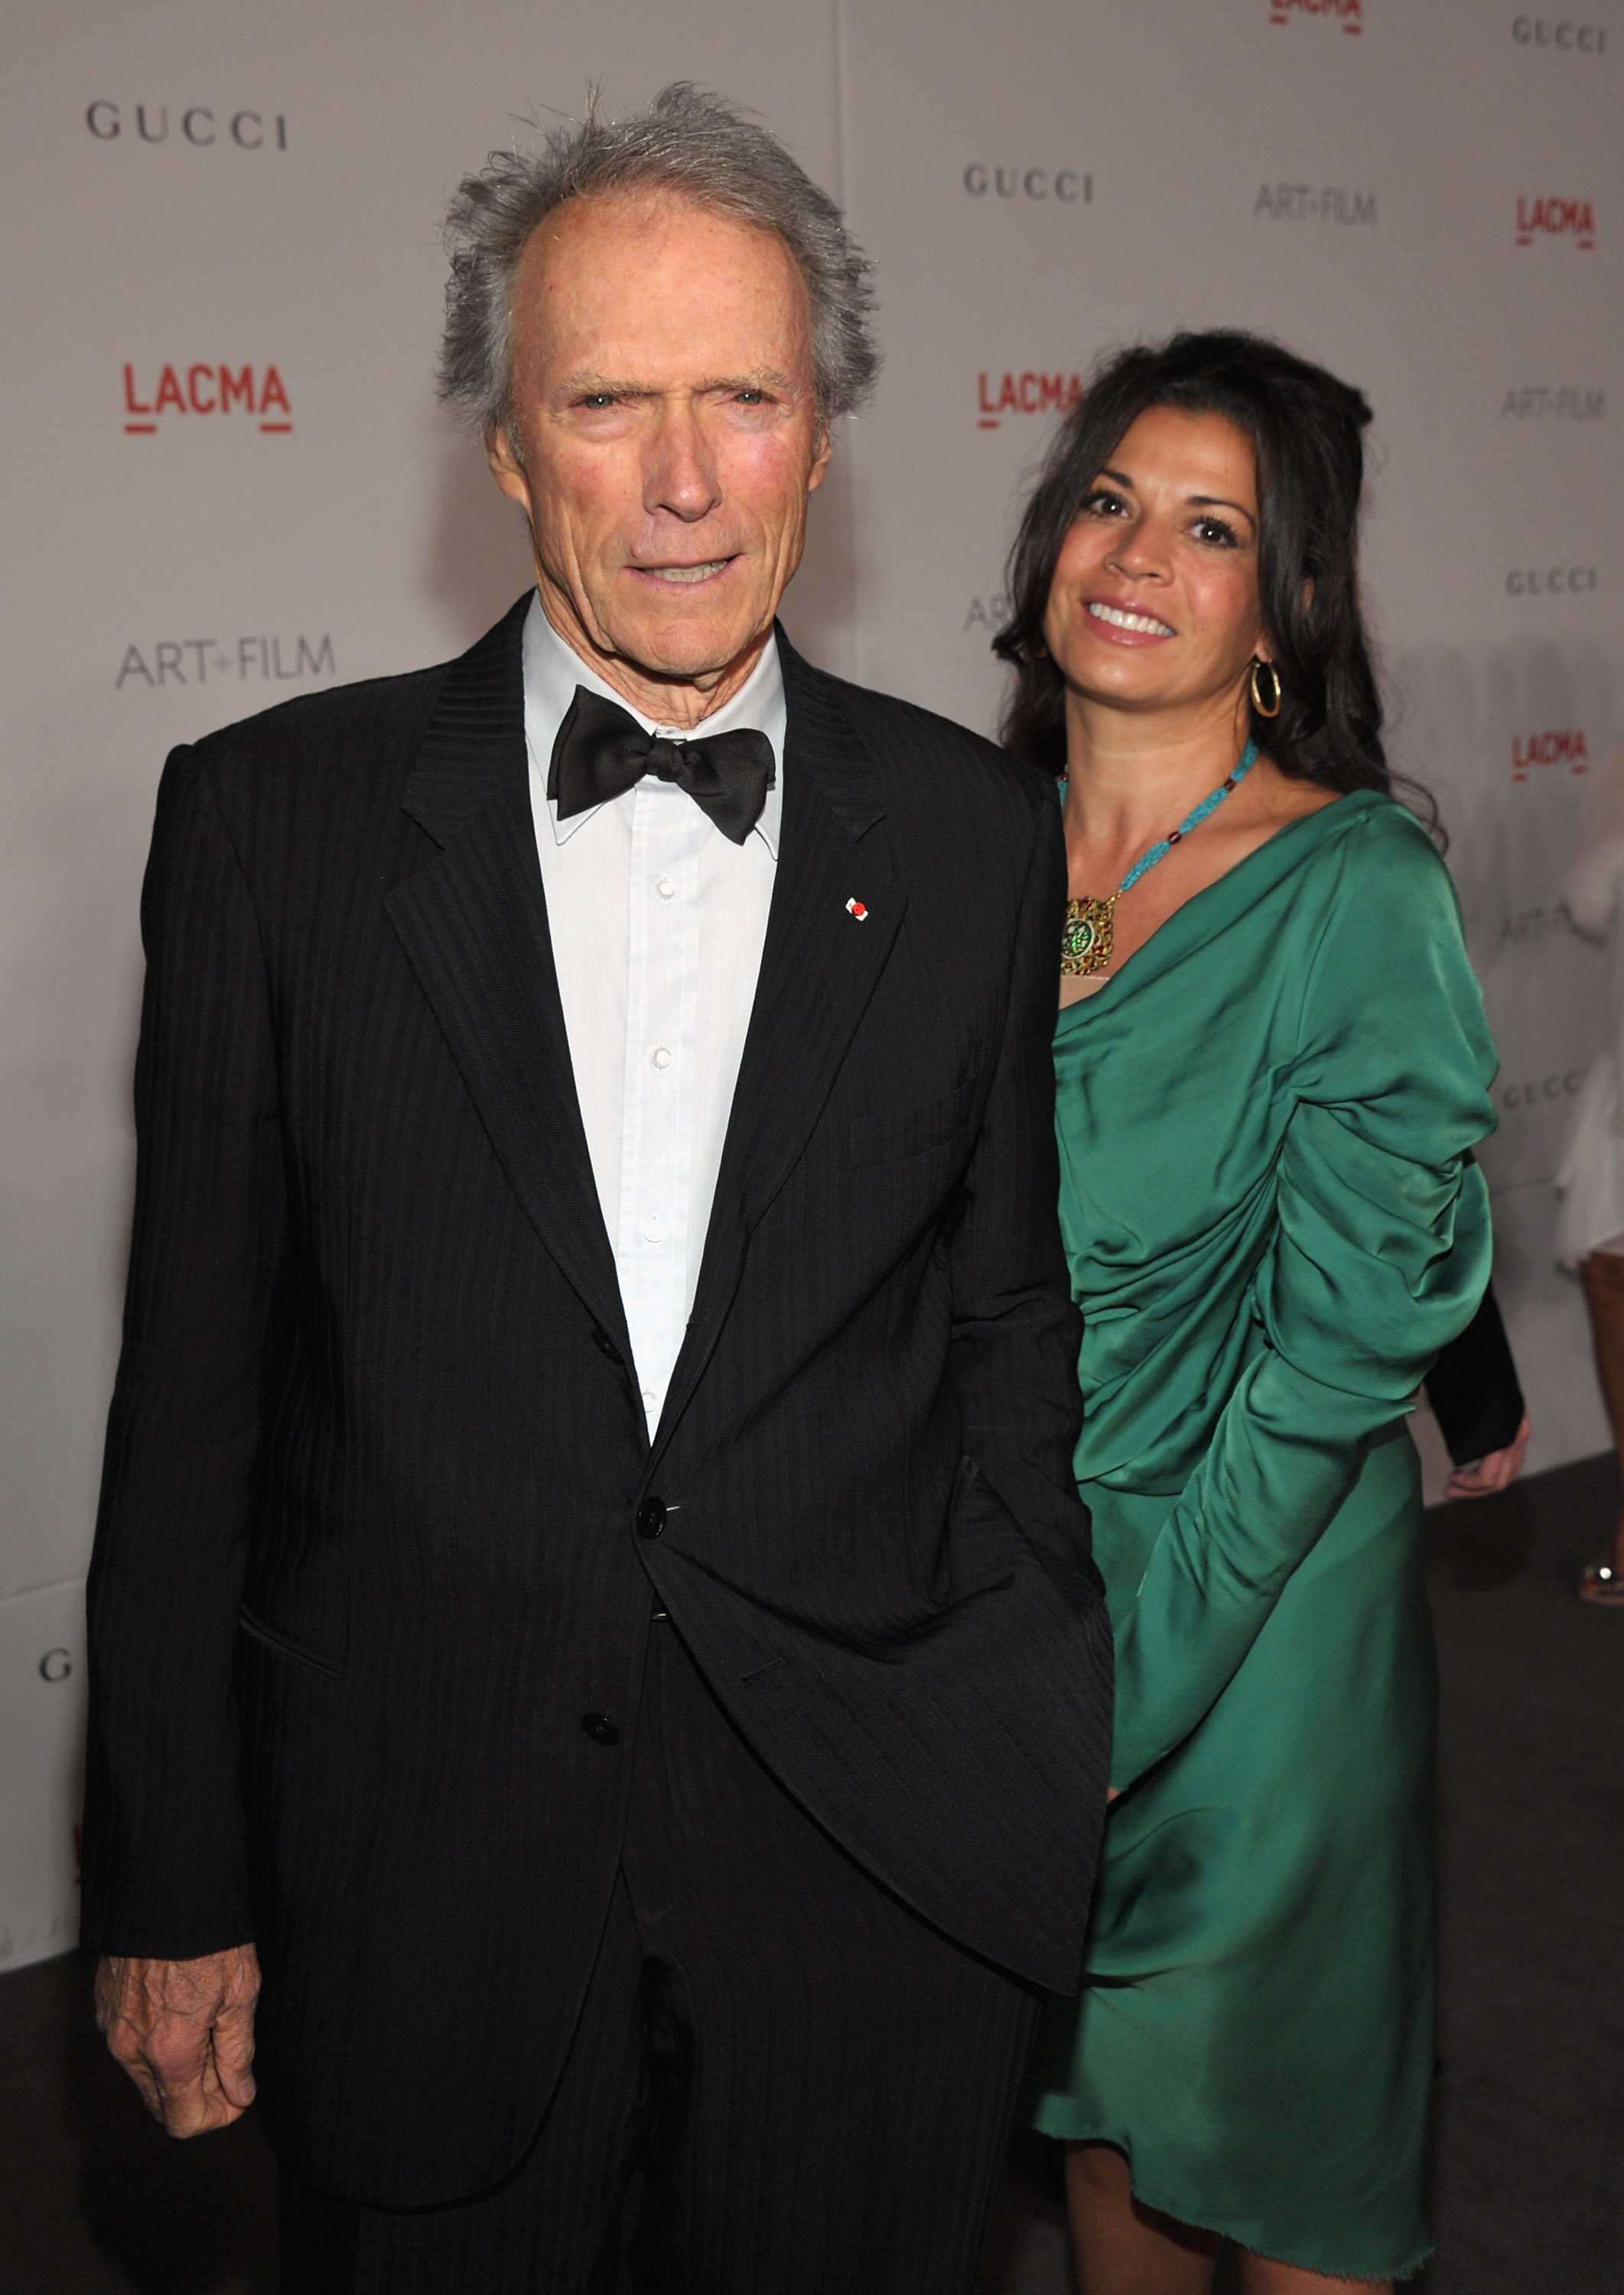 Clint Eastwood and wife Dina Eastwood attend LACMA Art + Film Gala Honoring Clint Eastwood and John Baldessari at Los Angeles County Museum of Art on November 5, 2011. | Photo: Getty Images